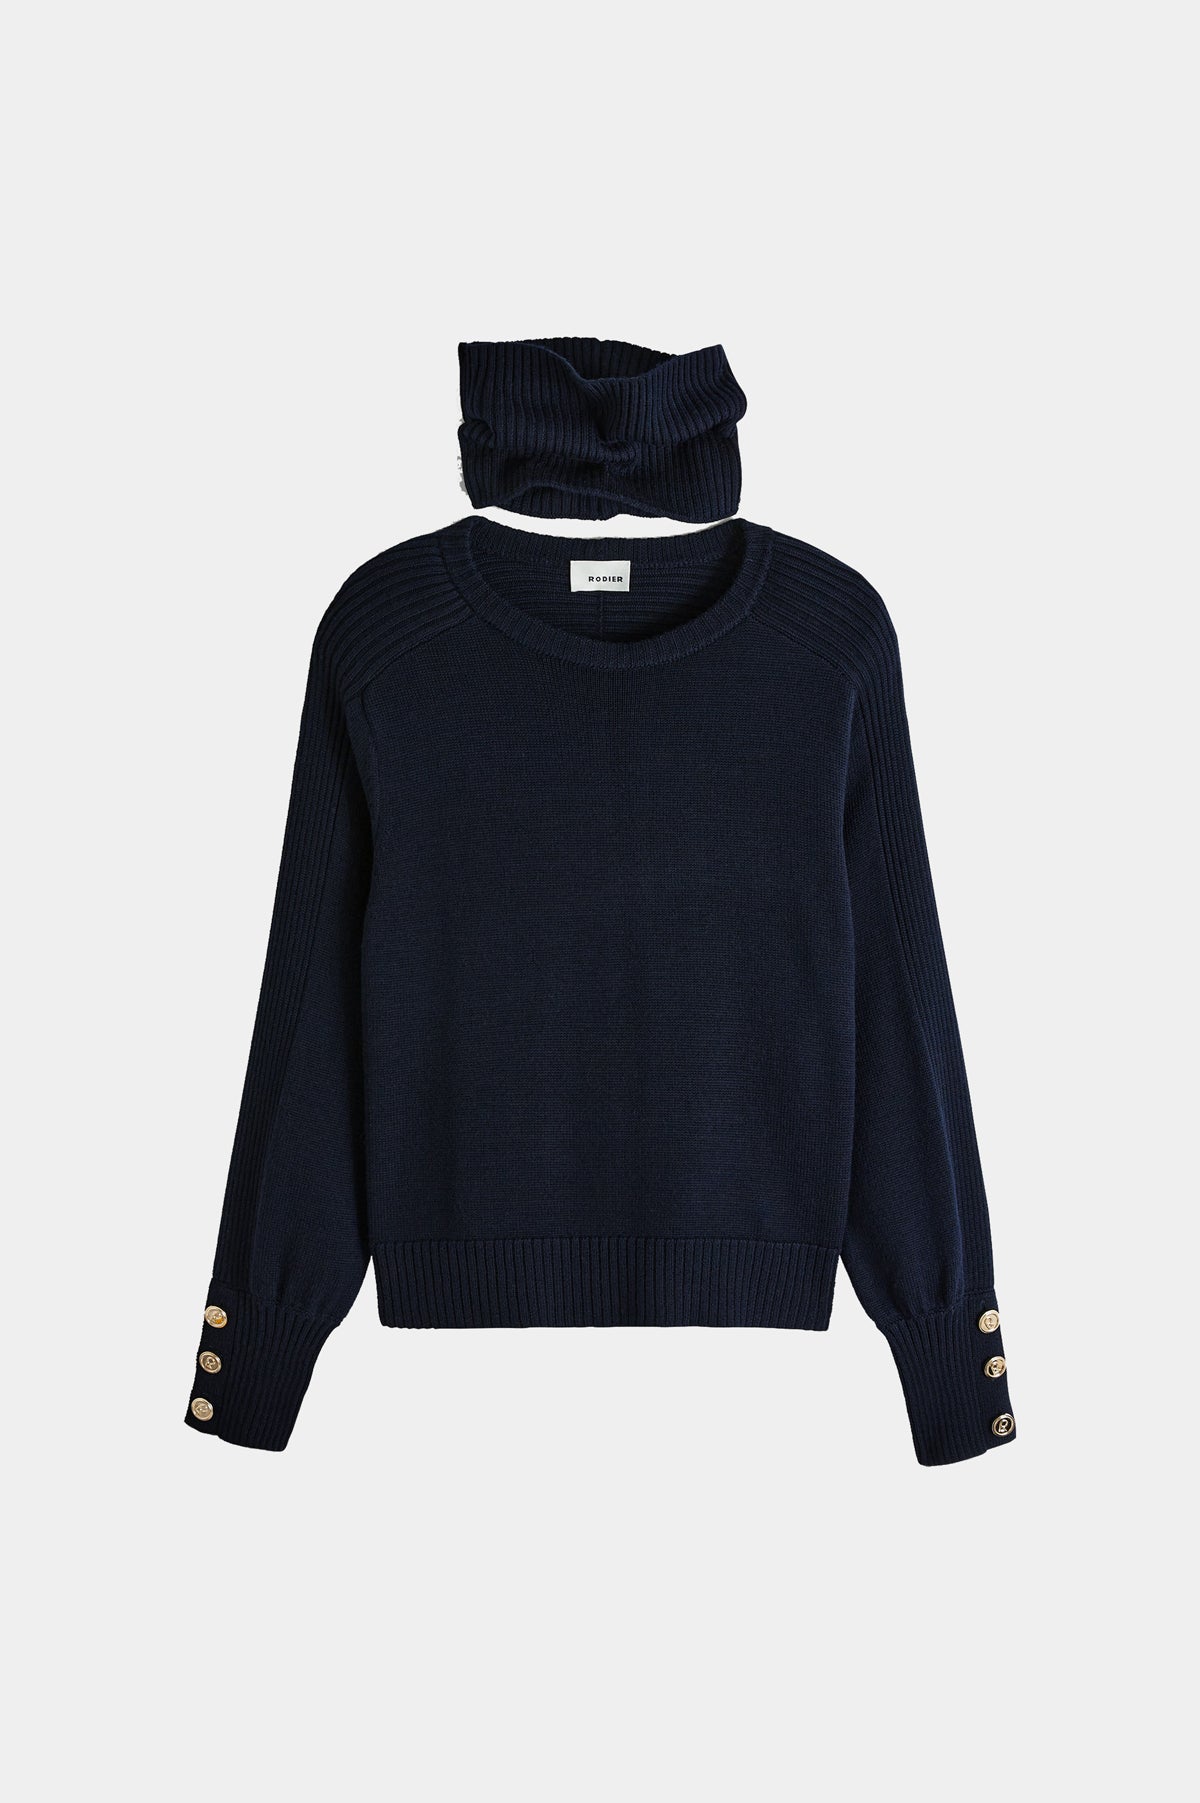 Venice Modular Knitted Pullover